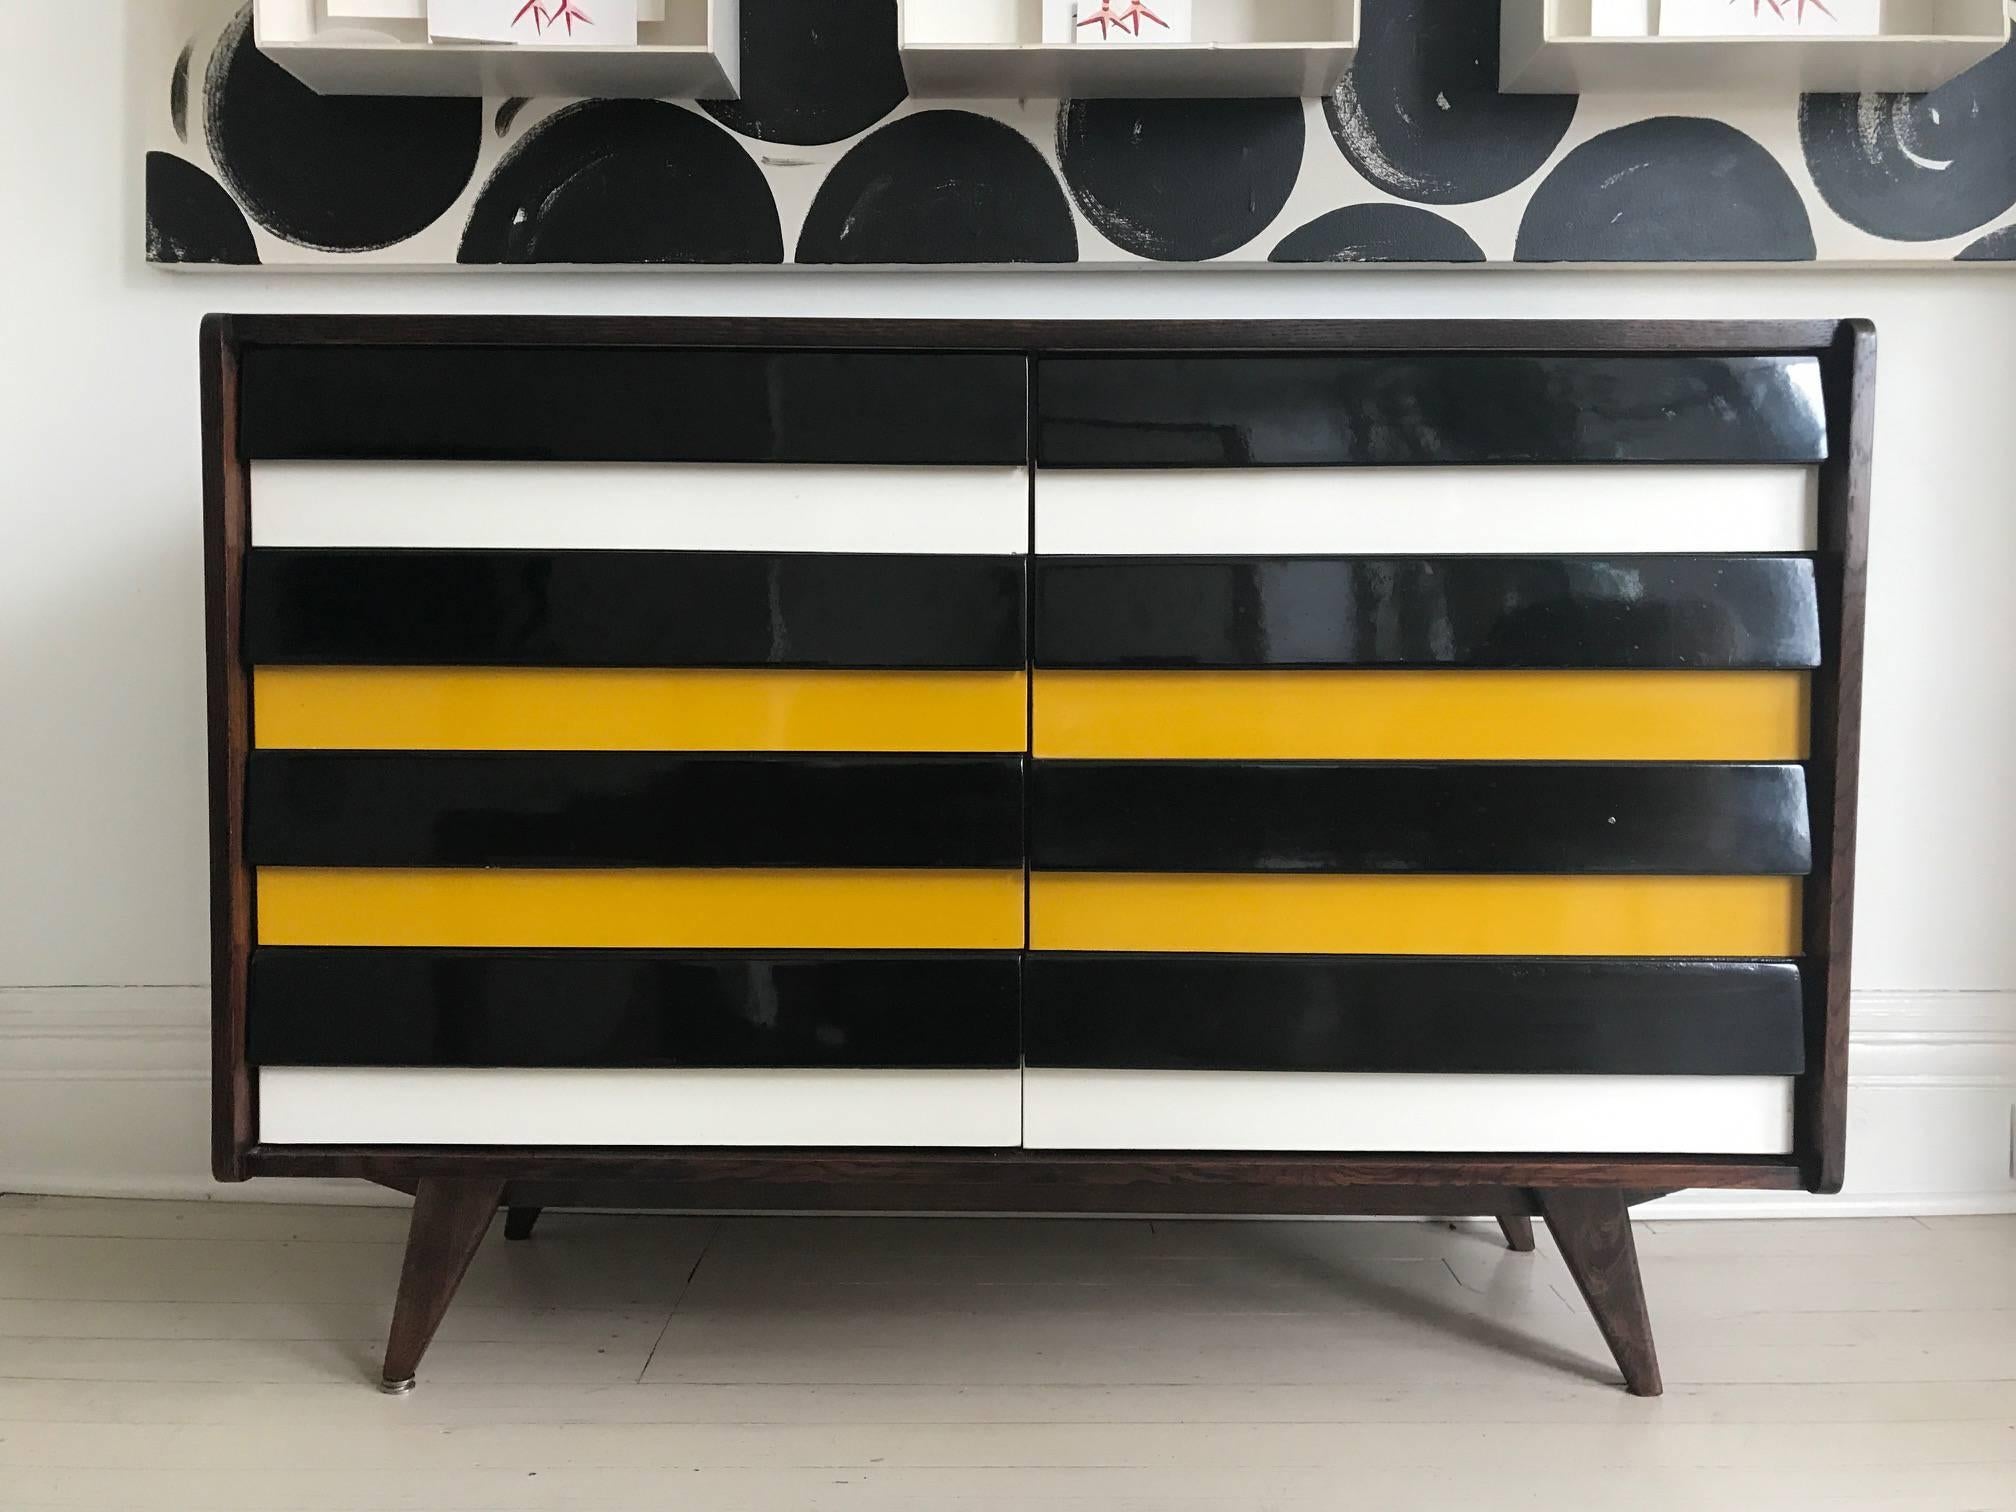 Walnut chest of drawers designed by Jiri Jiroutek for Interier Praha. High gloss black, white and yellow wood drawers four on each side.